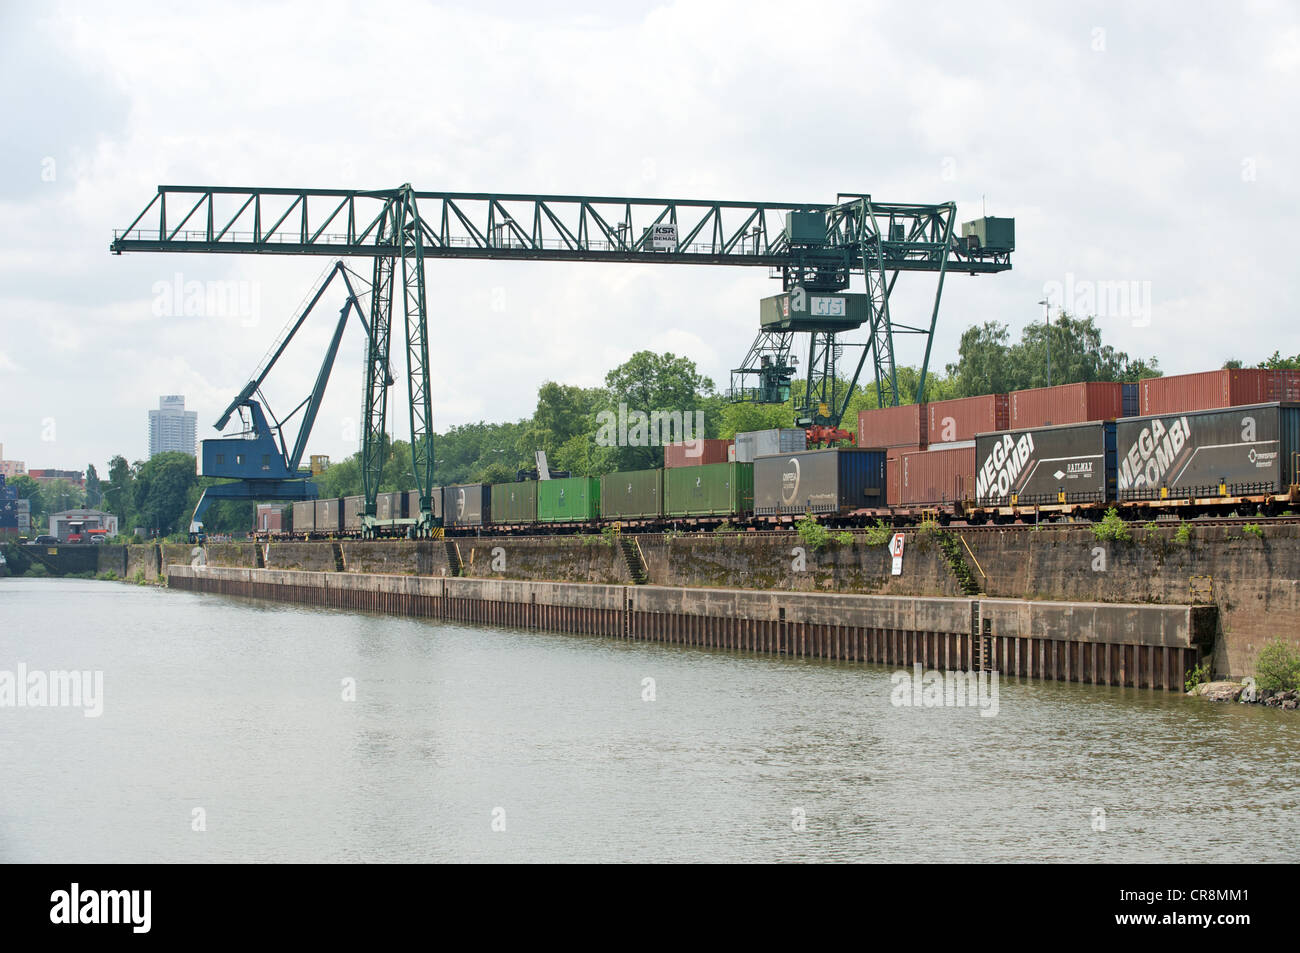 Niehl railway container terminal Cologne Germany Stock Photo